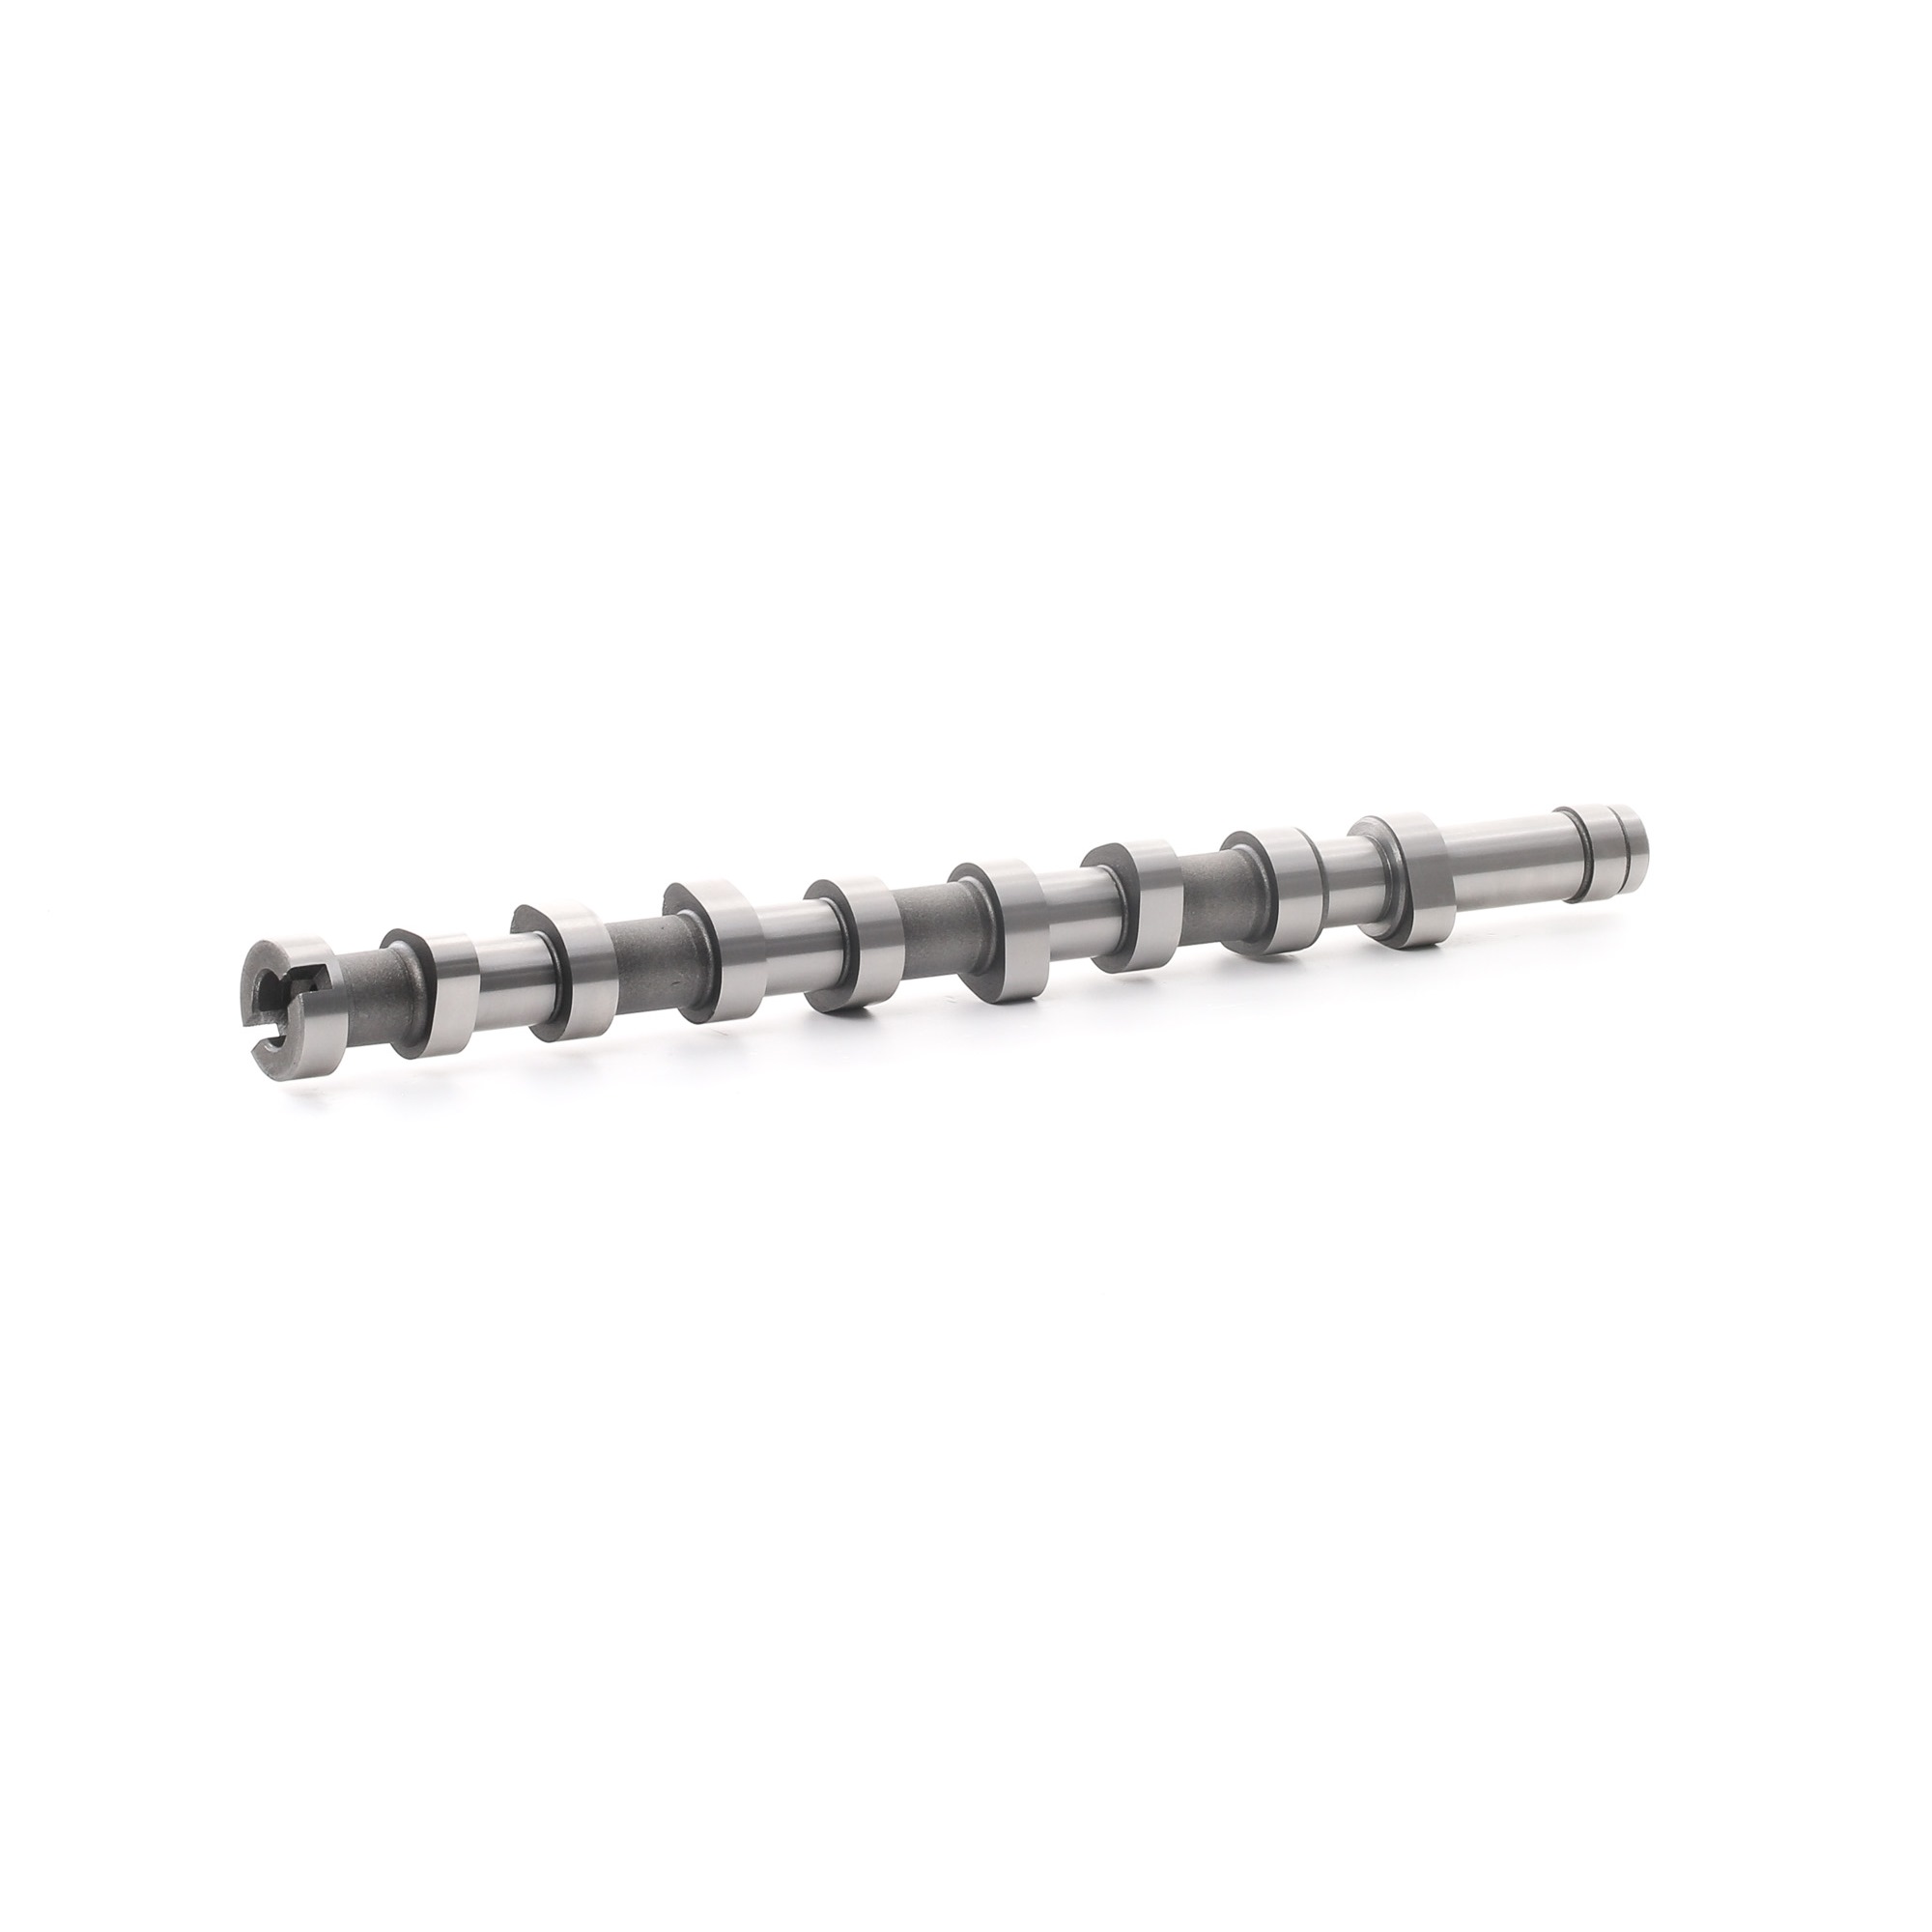 GT Camshaft 1685737 Fit For Ford C-Max Fiesta Focus Mondeo 1.4TDCI 1.6TDCI 1.6TDCI 